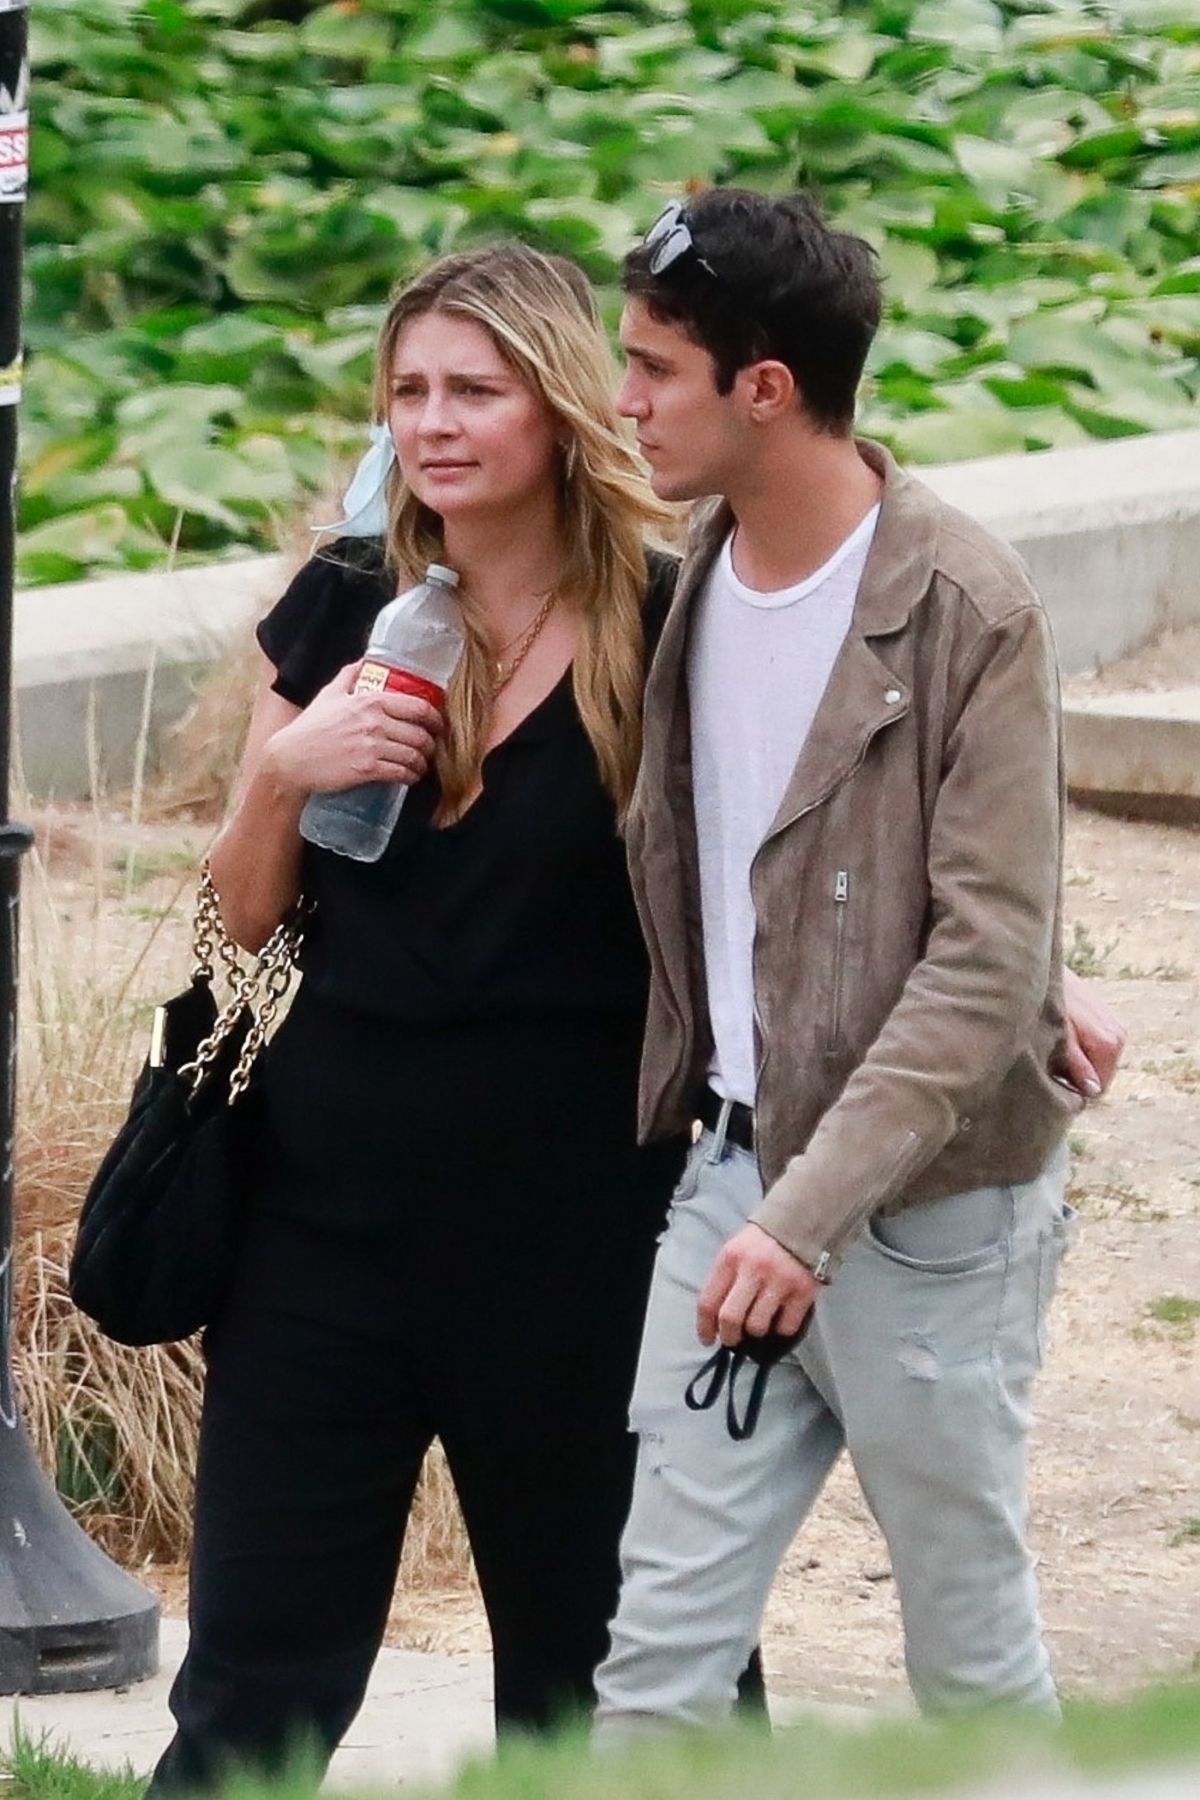 mischa-barton-and-gian-marco-flamini-out-kissing-in-los-angeles-09-08-2020-0.jpg